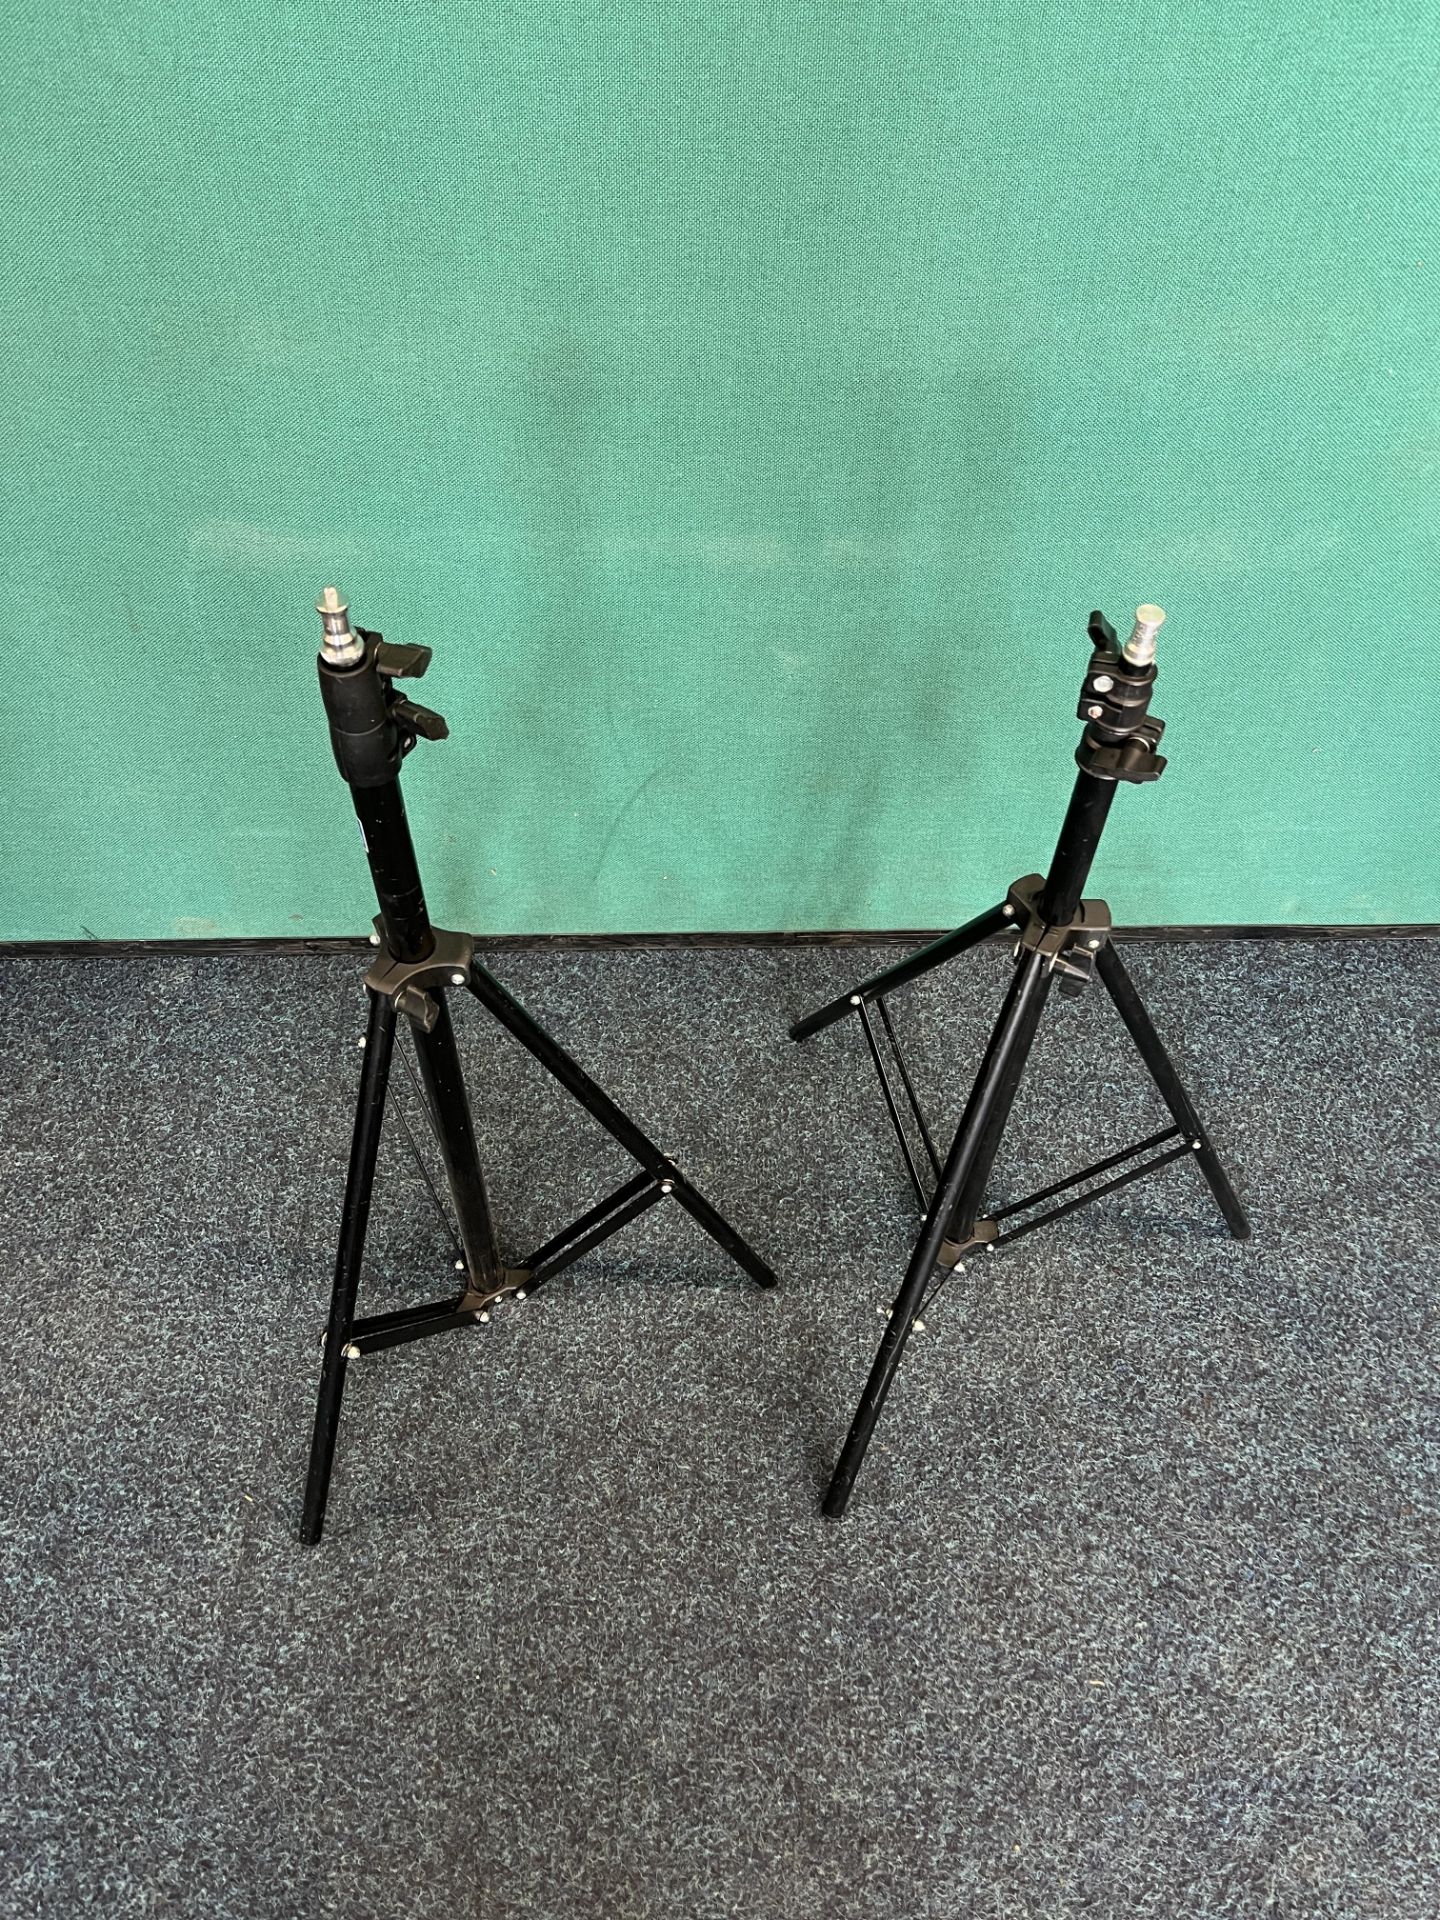 2 x Camera Tripods - As pictured